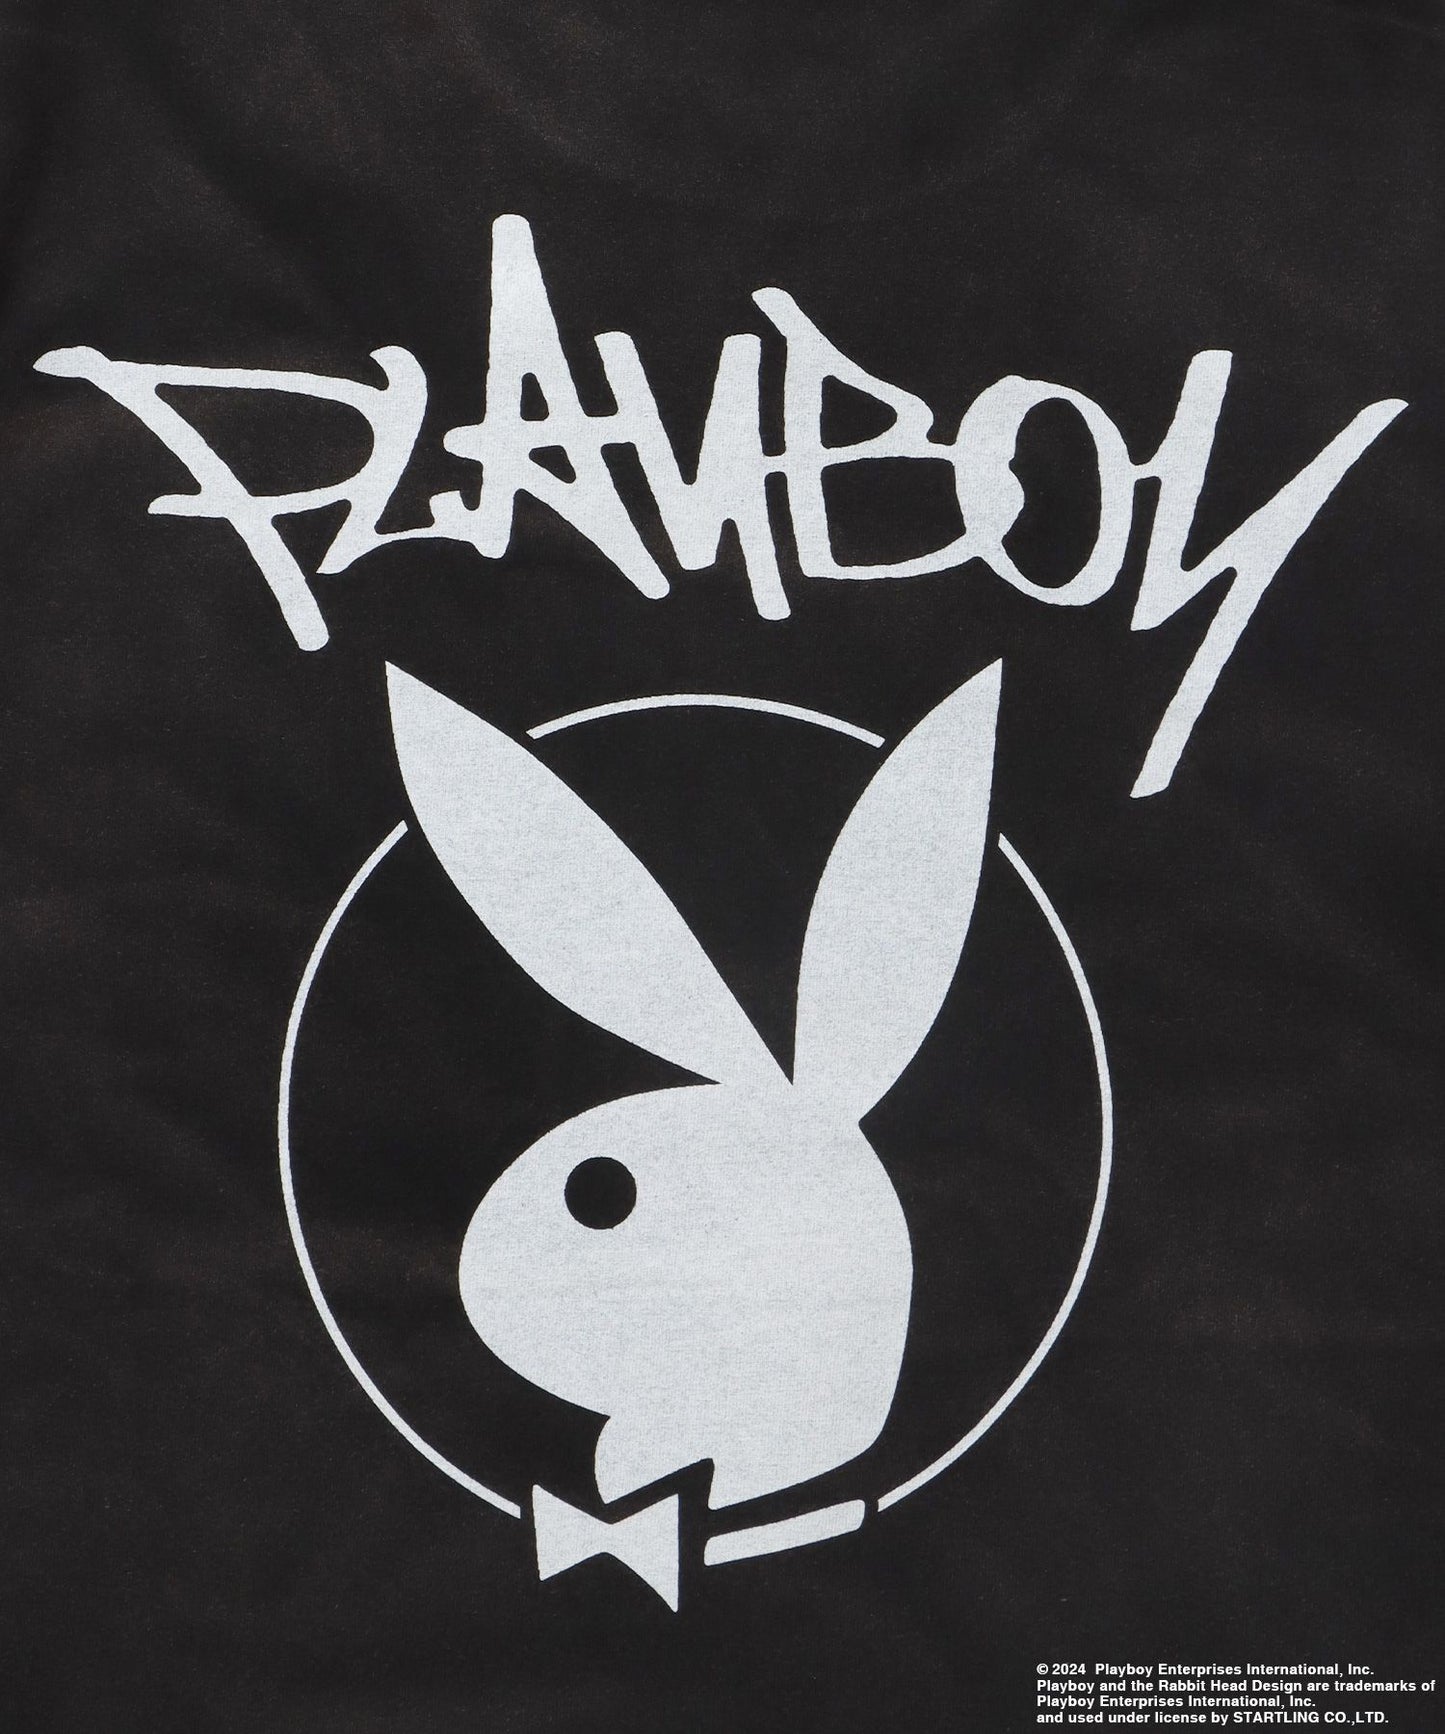 PB O.G LOGO FADE S/S TEE / PLAYBOY×Sequenz フェード加工 90s ヴィンテージ Tシャツ グラフィティ プリント 半袖 ブラック